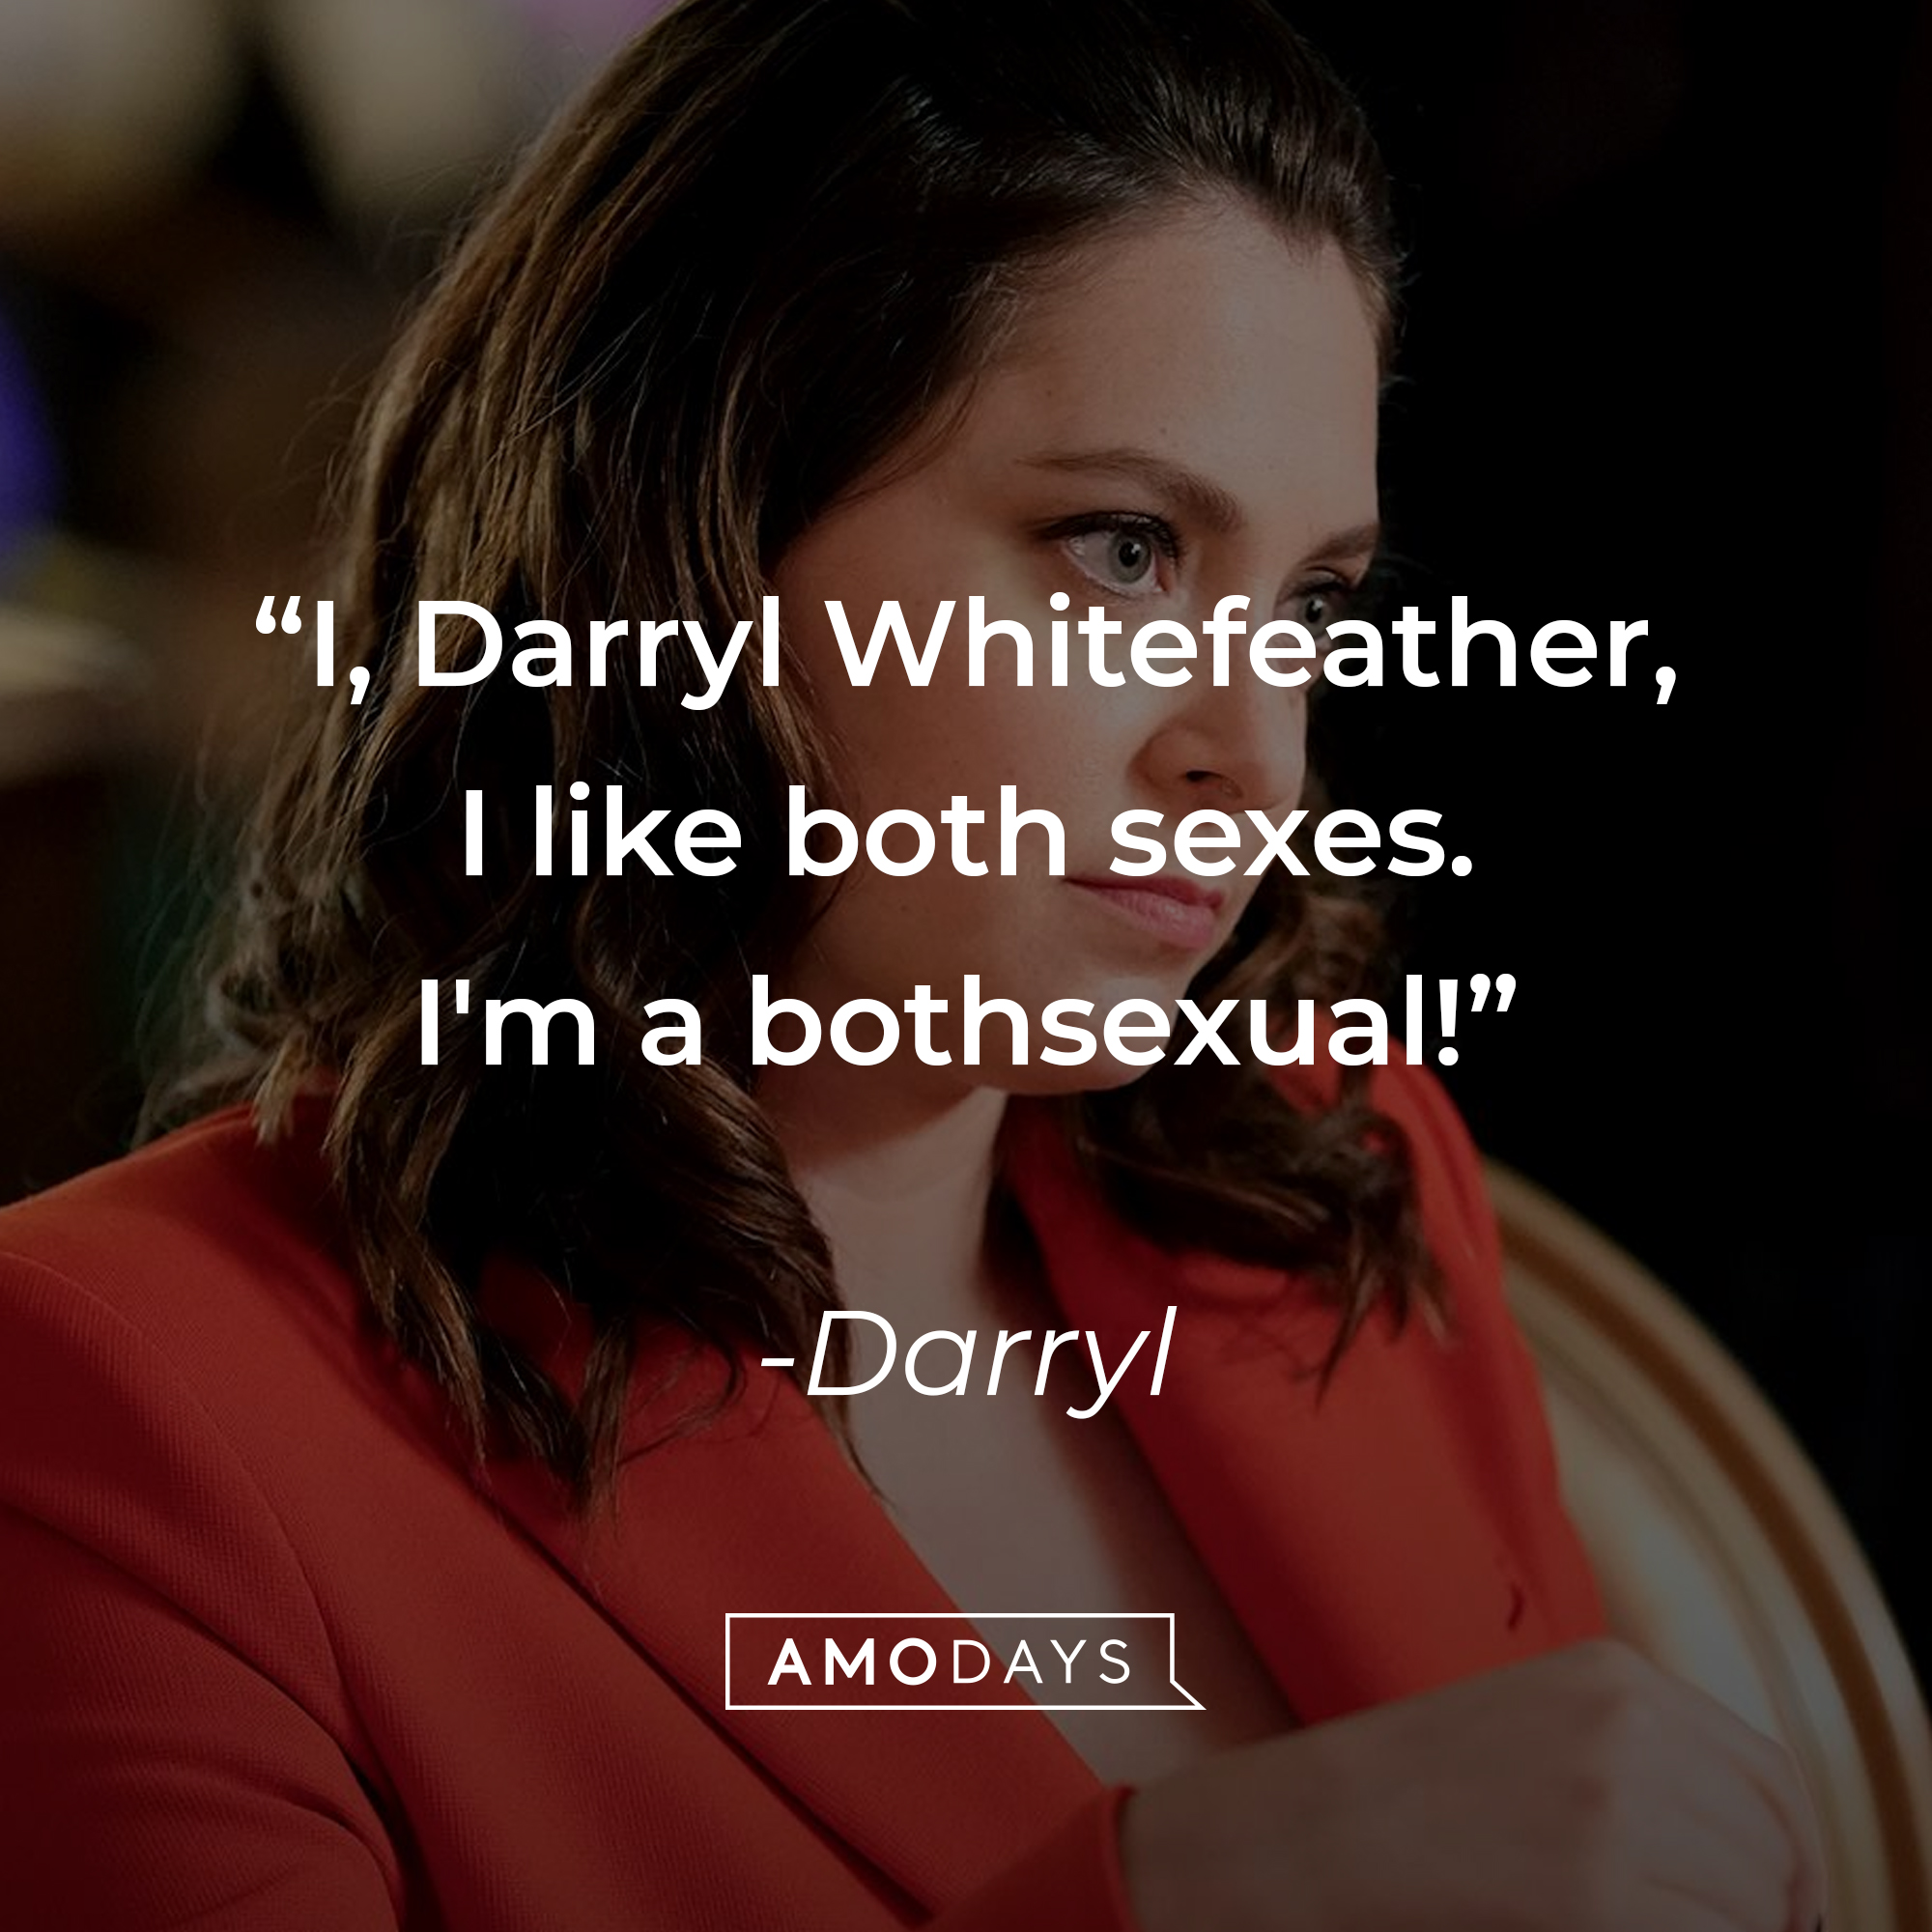 Rebecca, with Darryl’s quote : “I, Darryl Whitefeather, I like both sexes. I'm a bothsexual!” |Source: facebook.com/crazyxgf